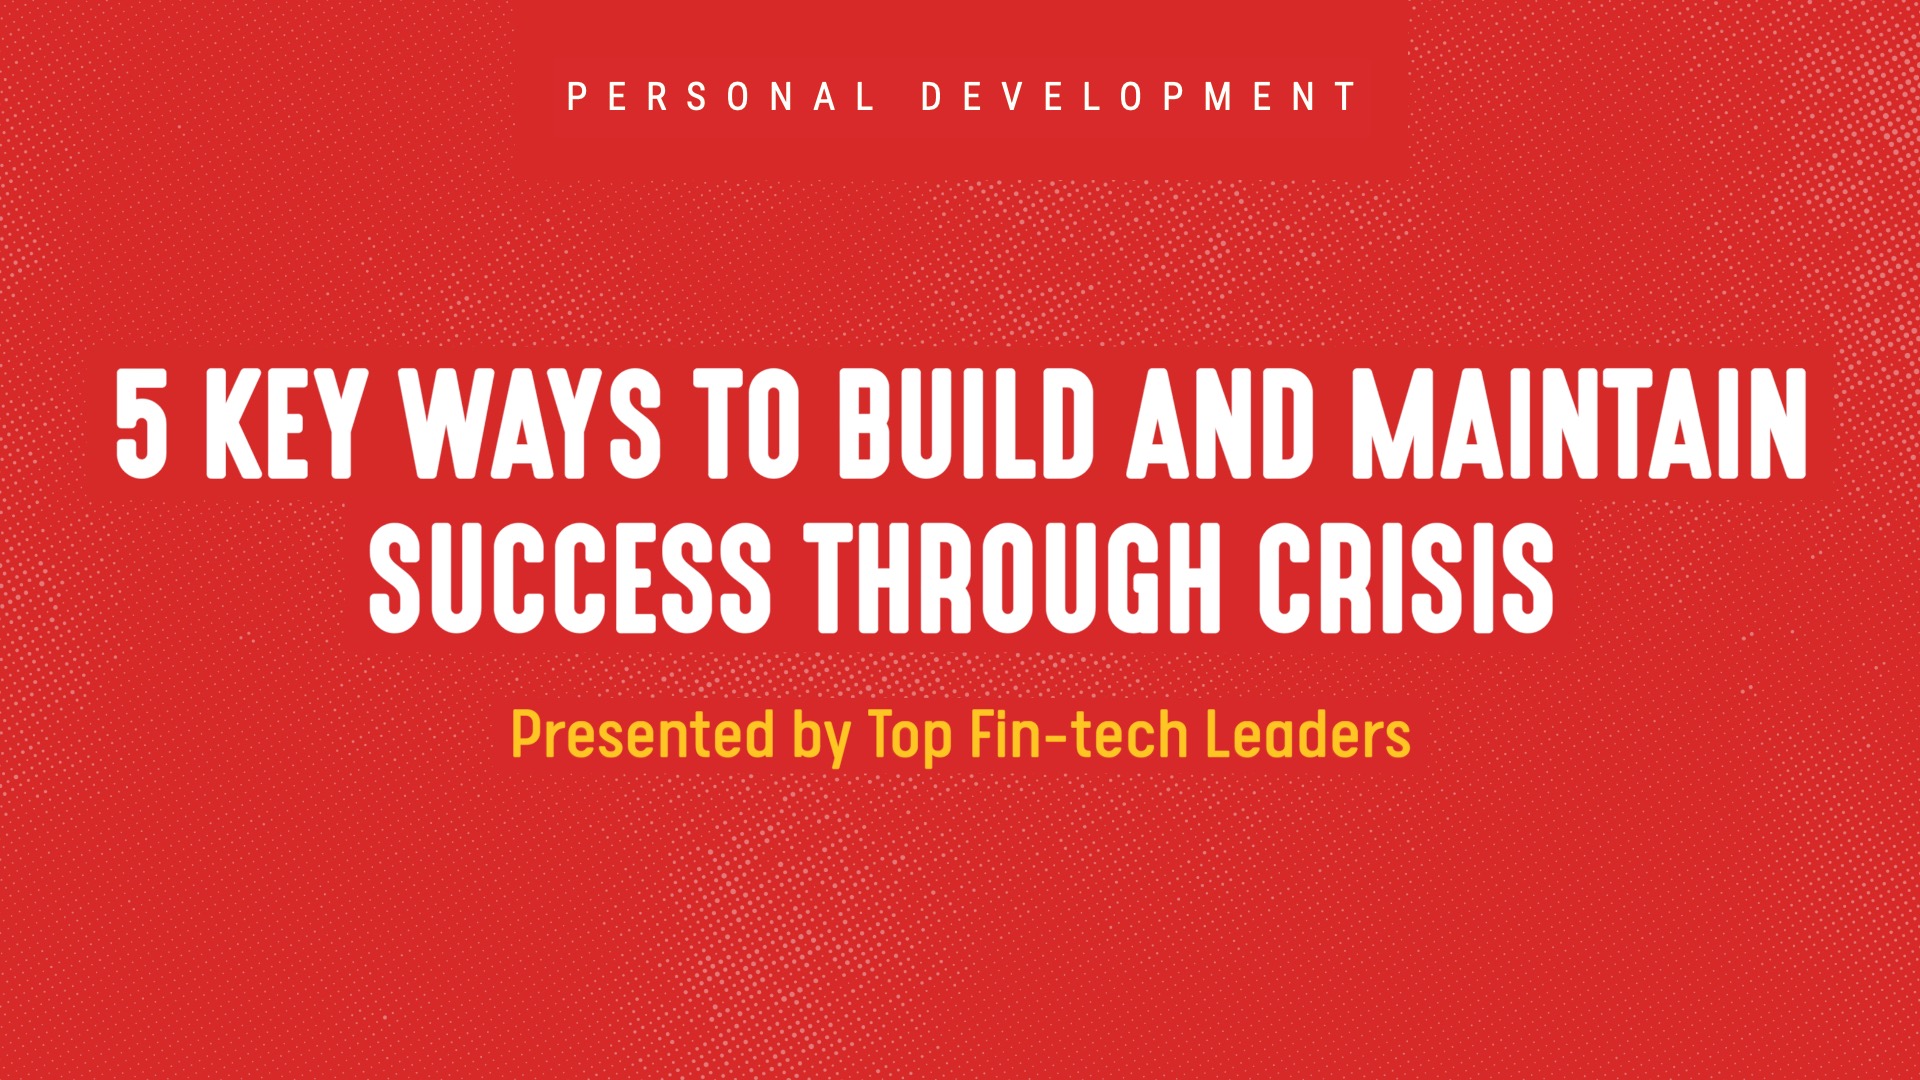 5 Ways To Build And Maintain Success Through Crisis: Presented By Top Fin-tech Leaders